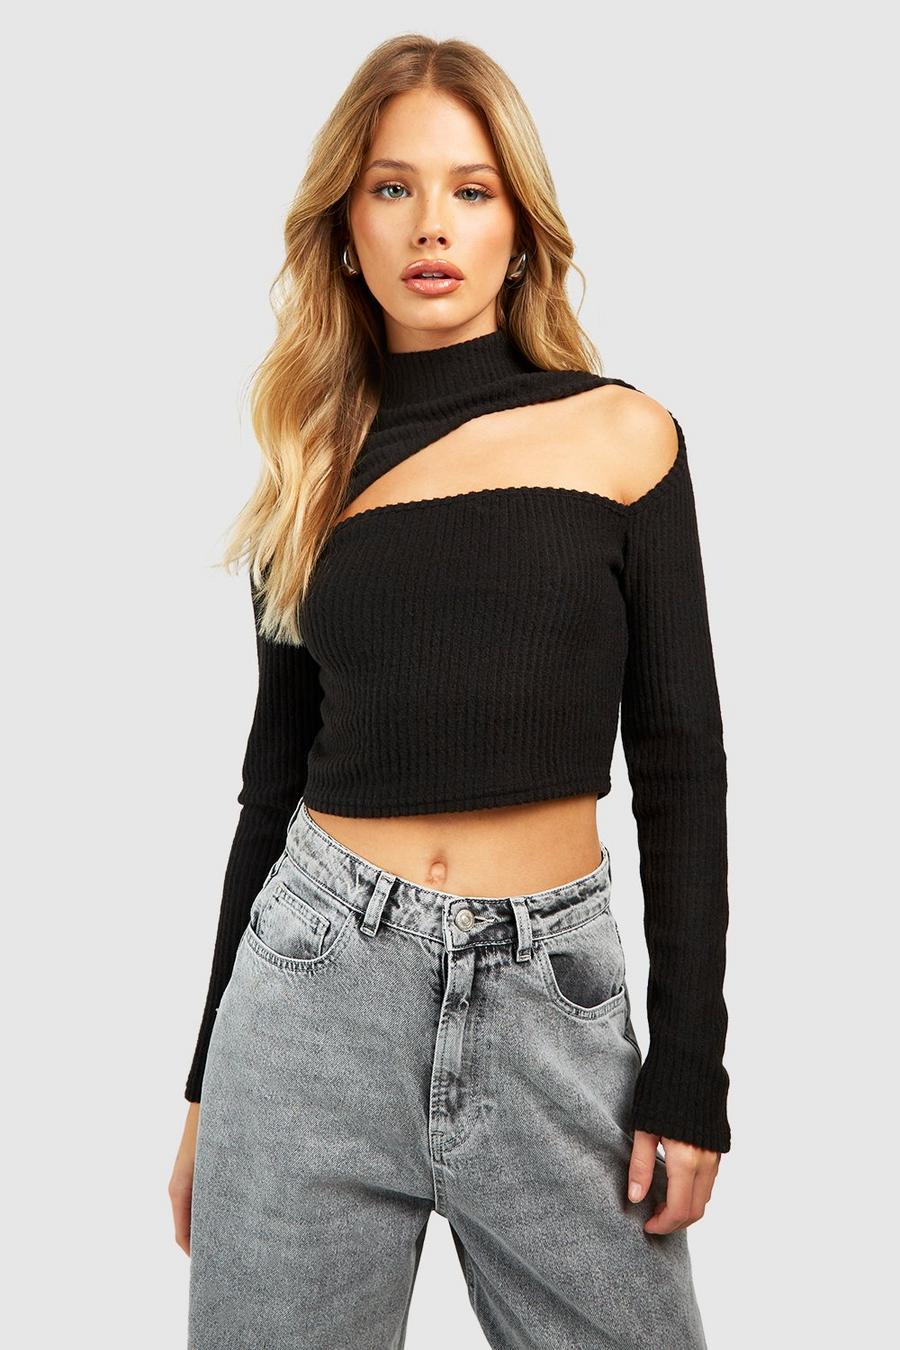 Women's Black Knitted High Neck Cut Out Top | Boohoo UK